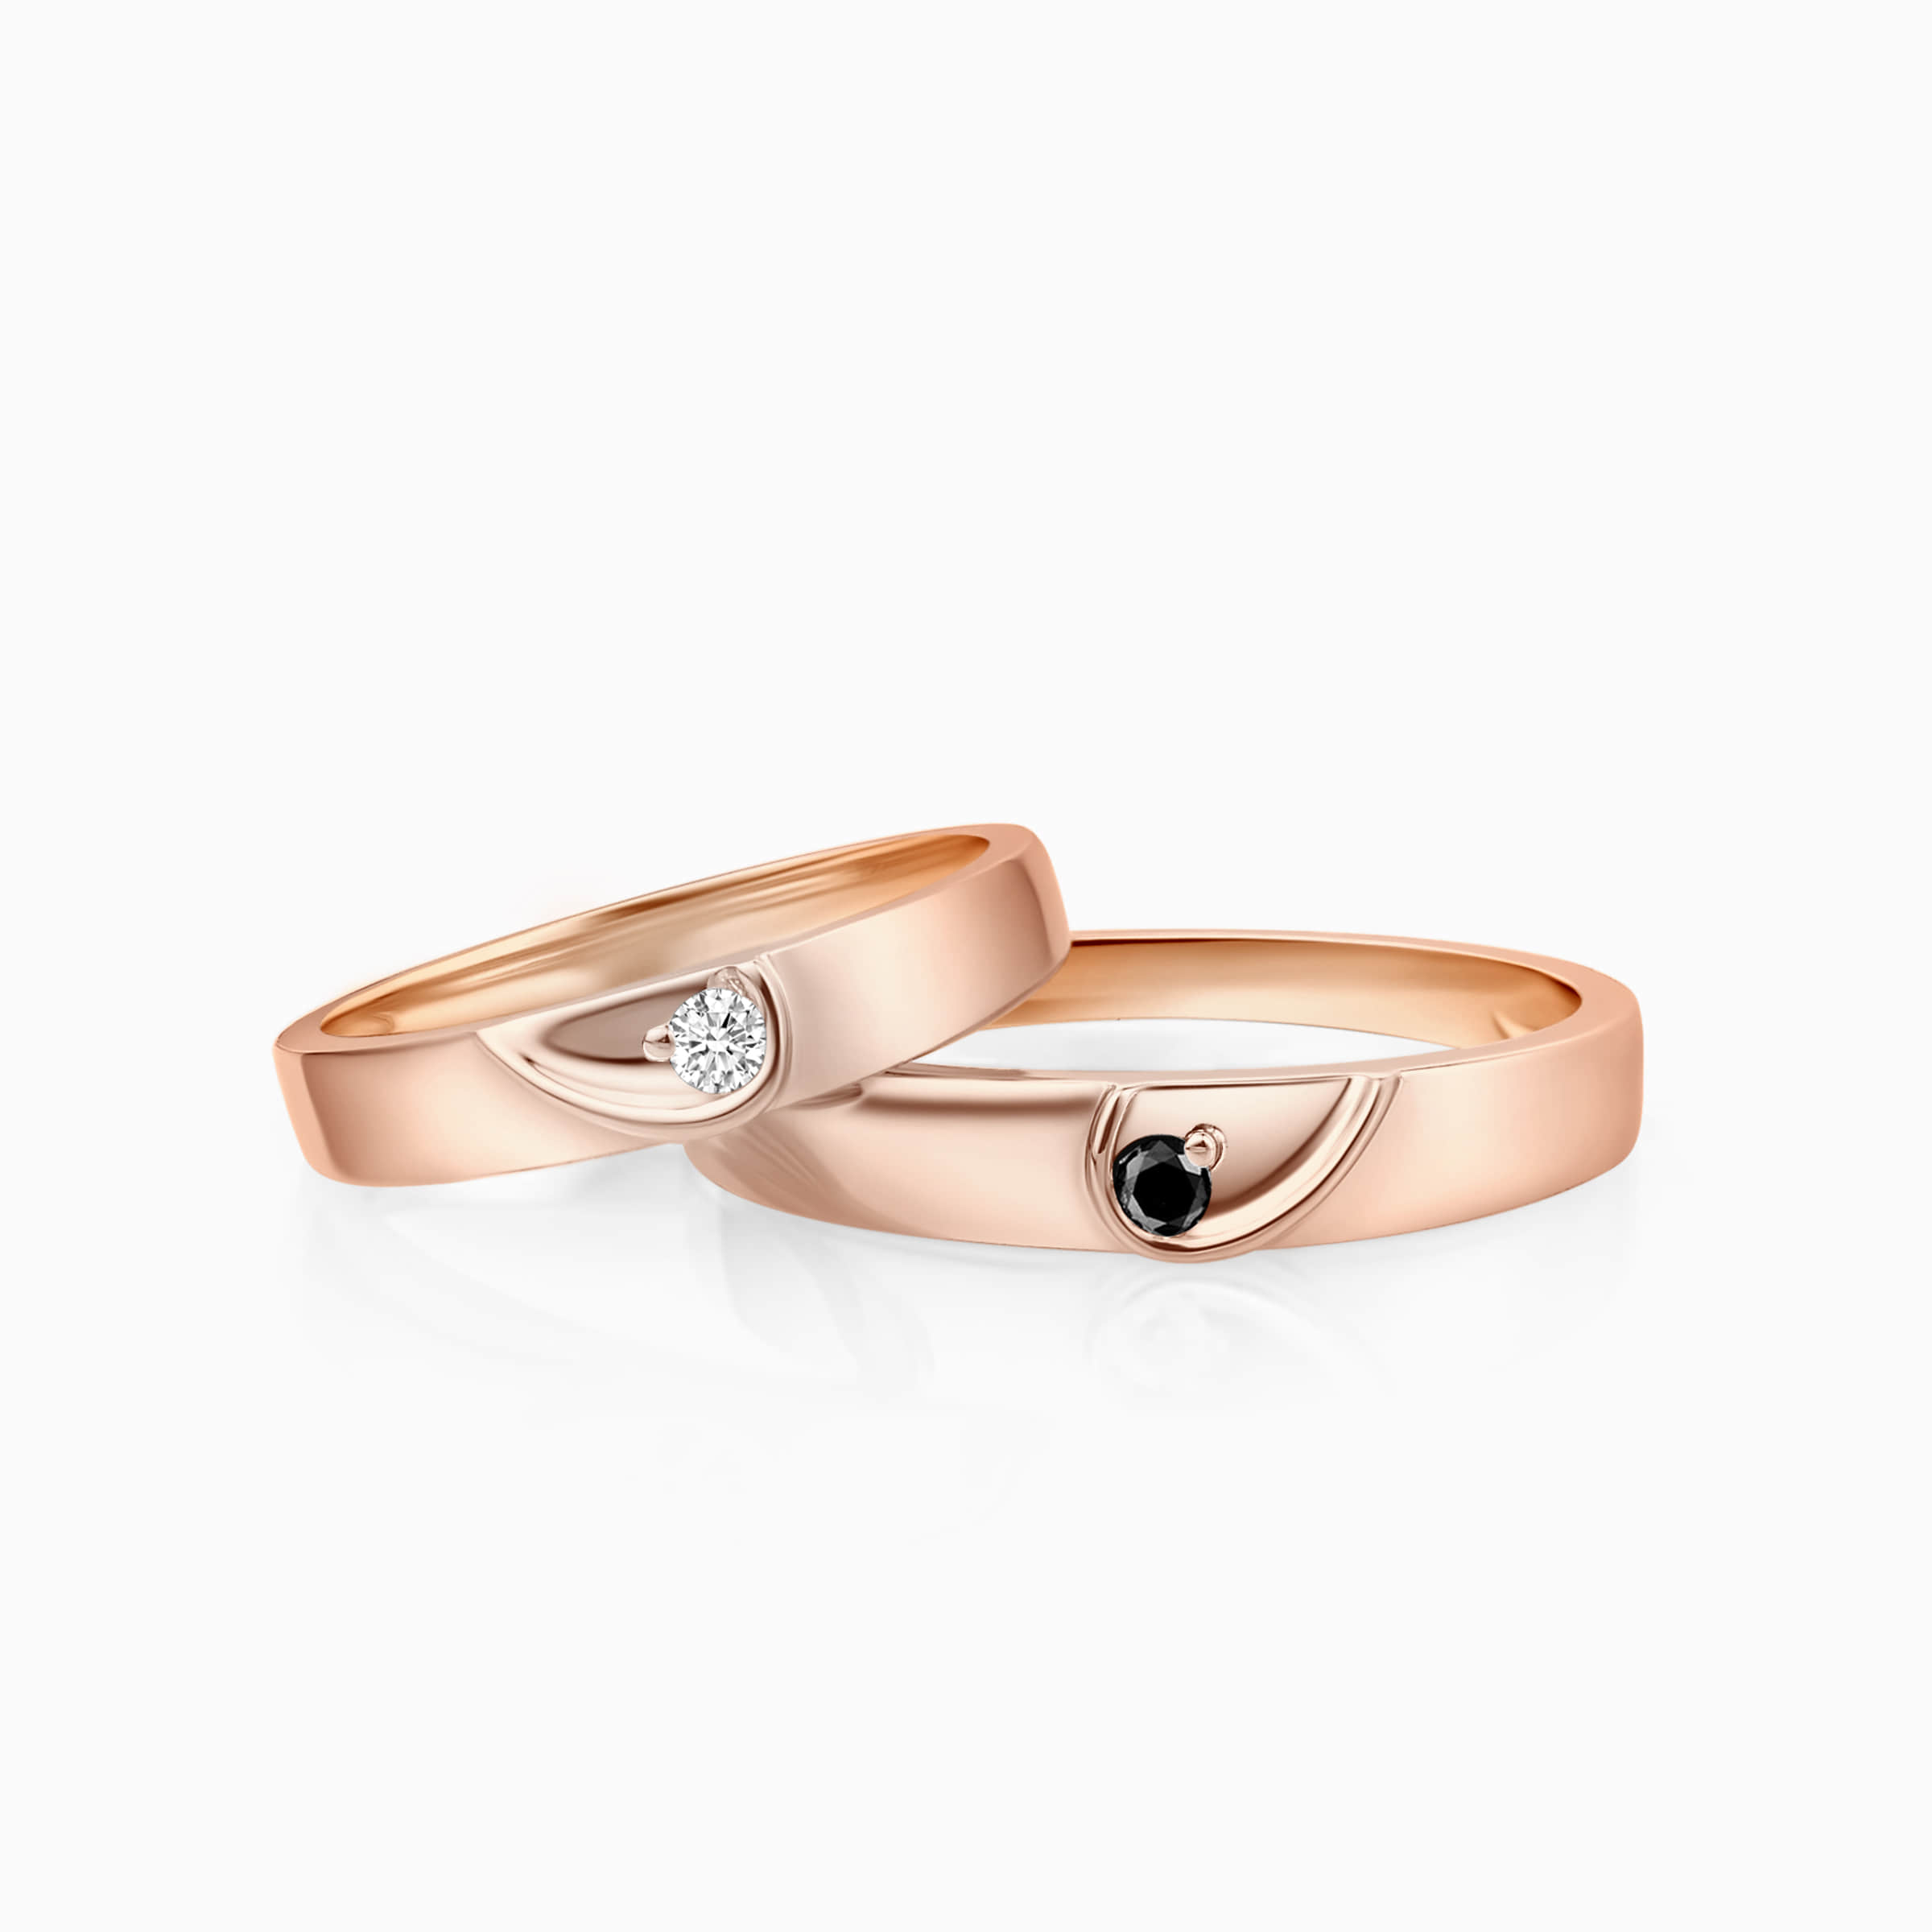 Darry Ring heart wedding rings for couple in rose gold